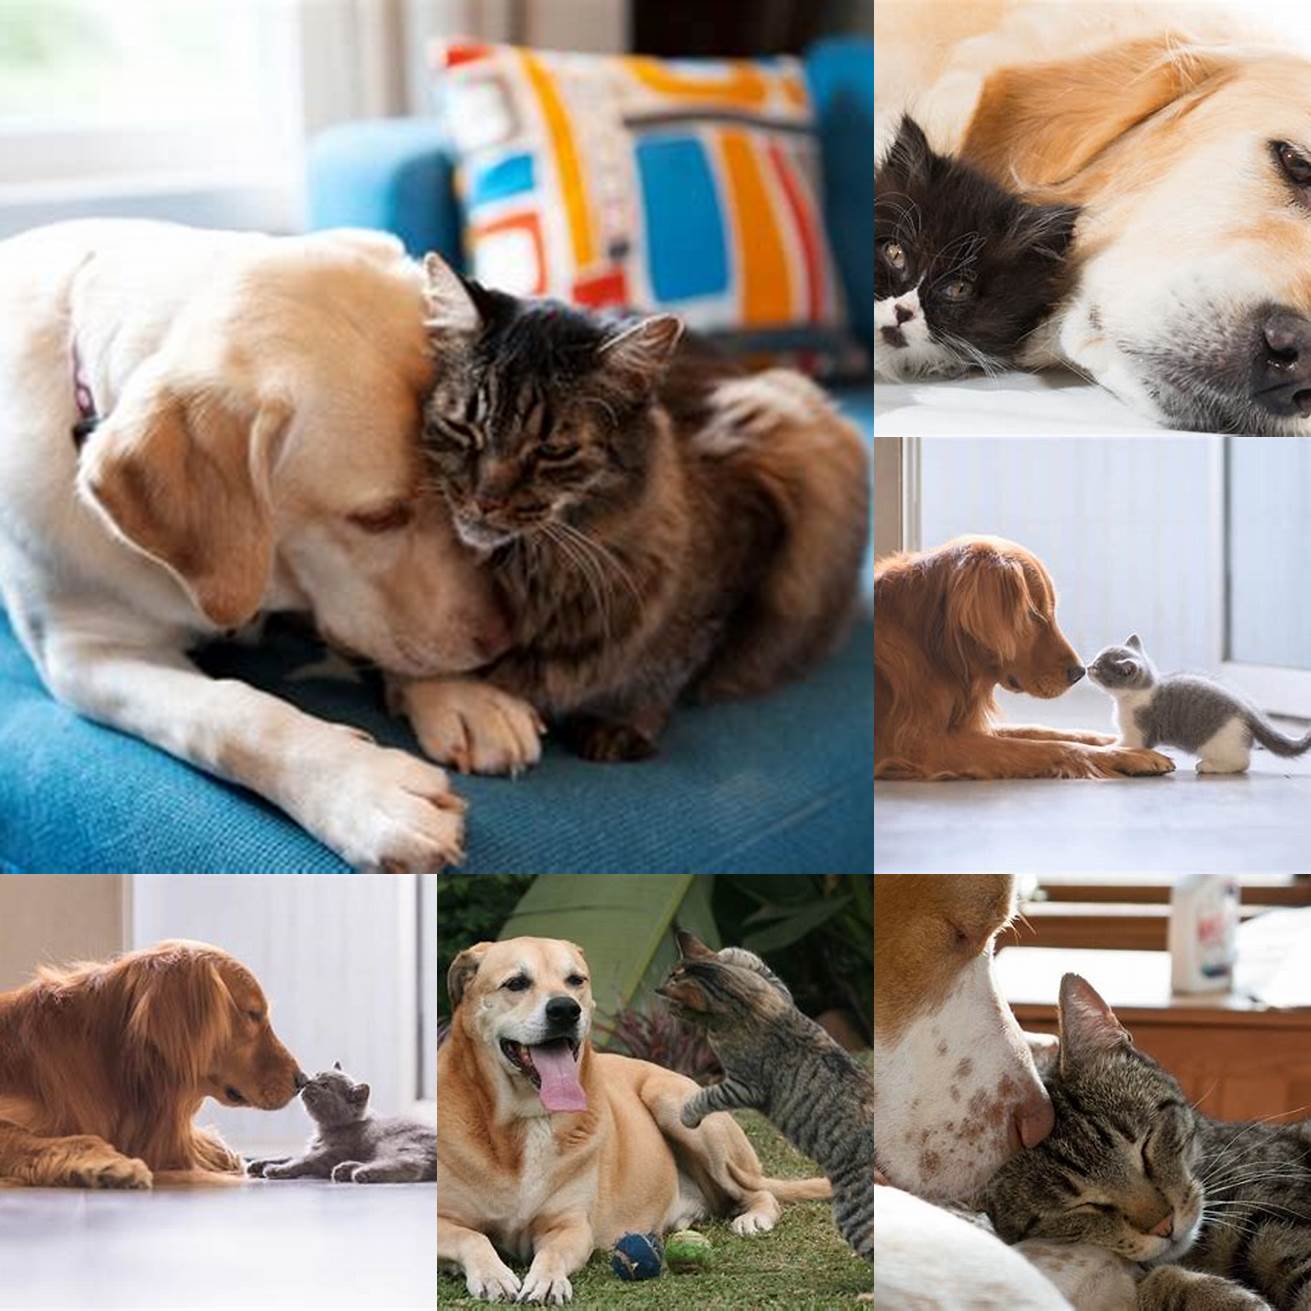 Introduce cats and dogs slowly and supervise their interactions